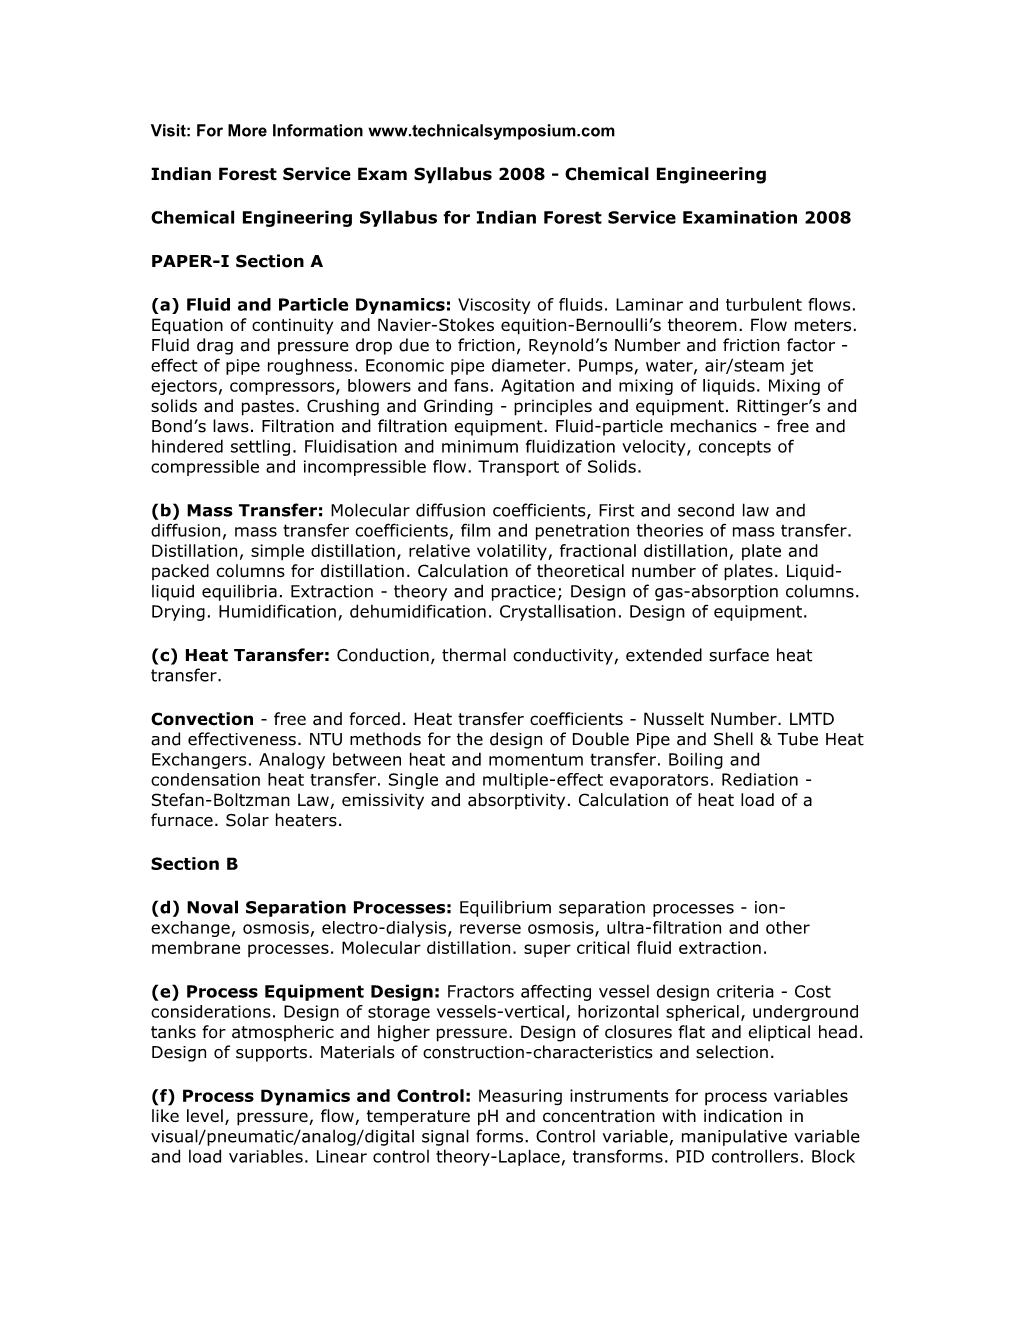 Indian Forest Service Exam Syllabus 2008 - Chemical Engineering